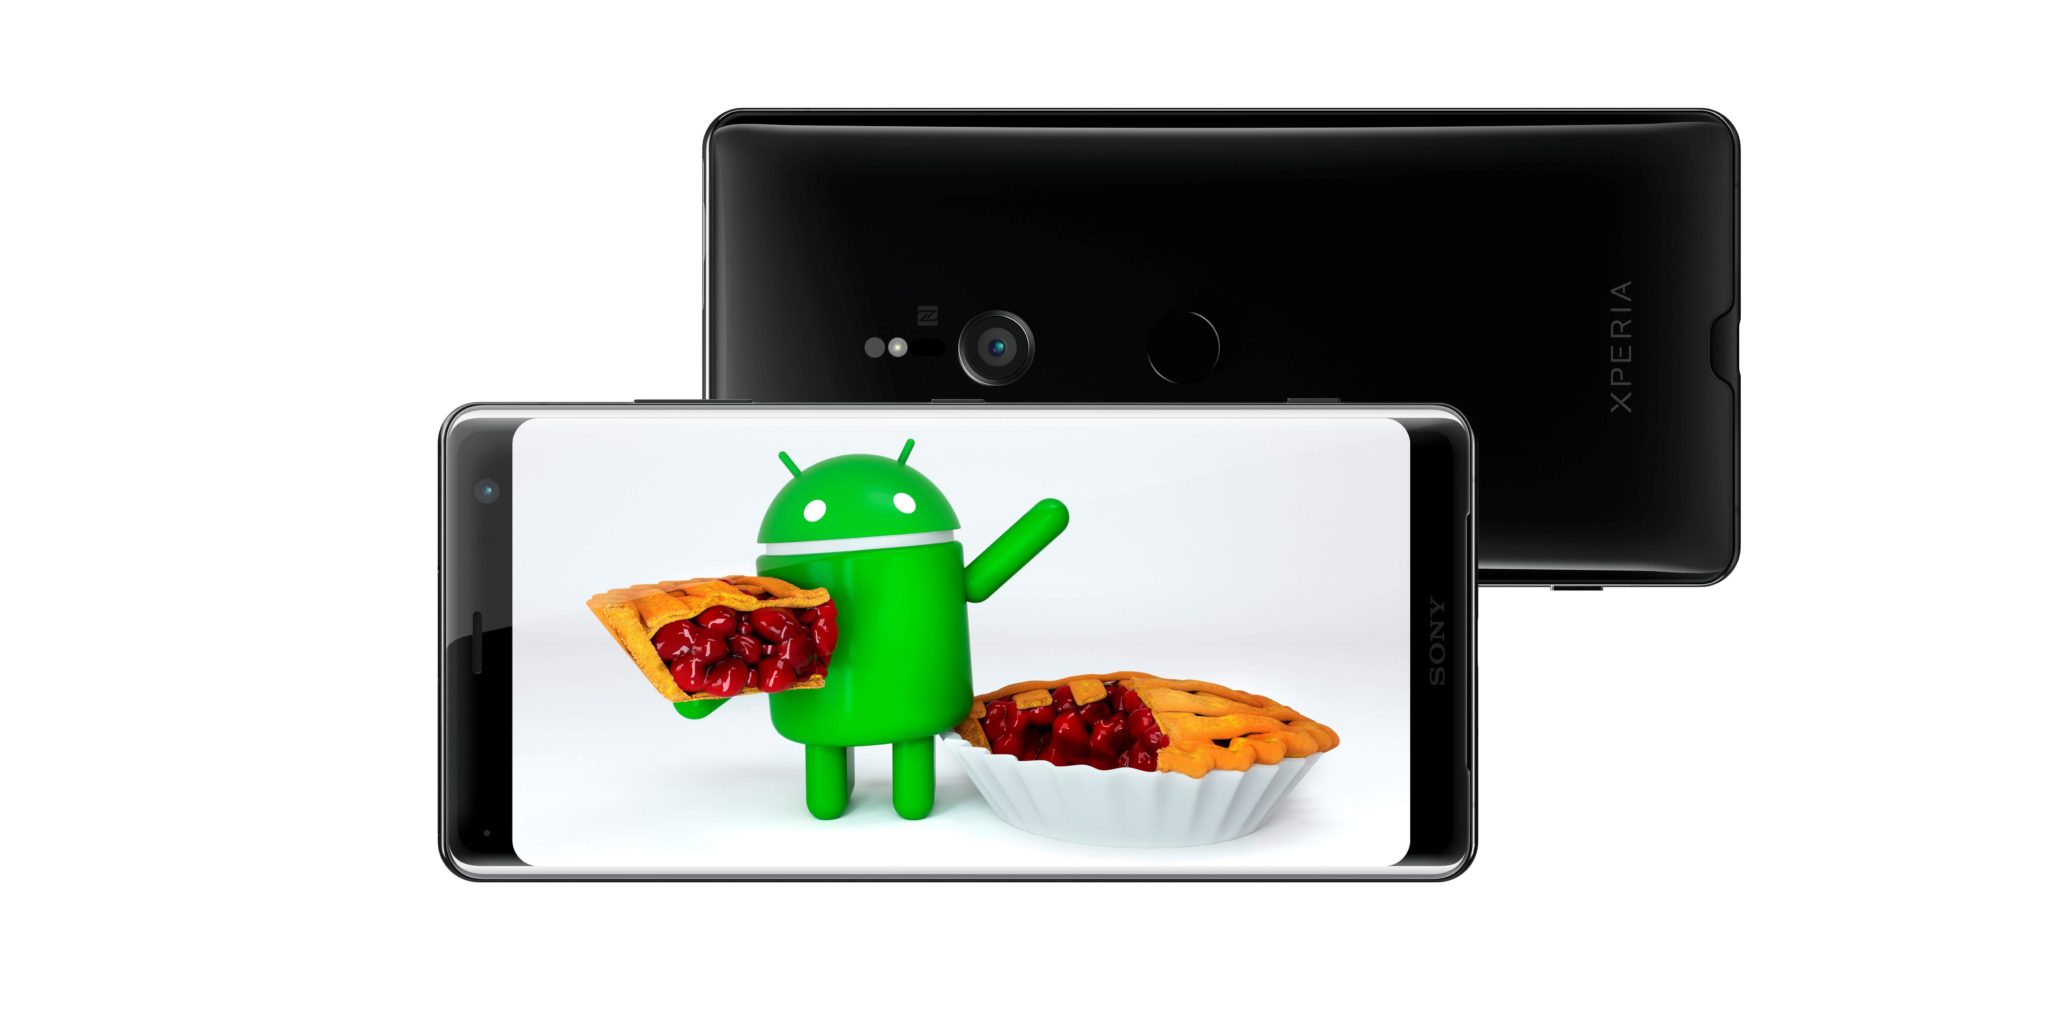 I spy with my little eye some early updates to Android 9 Pie